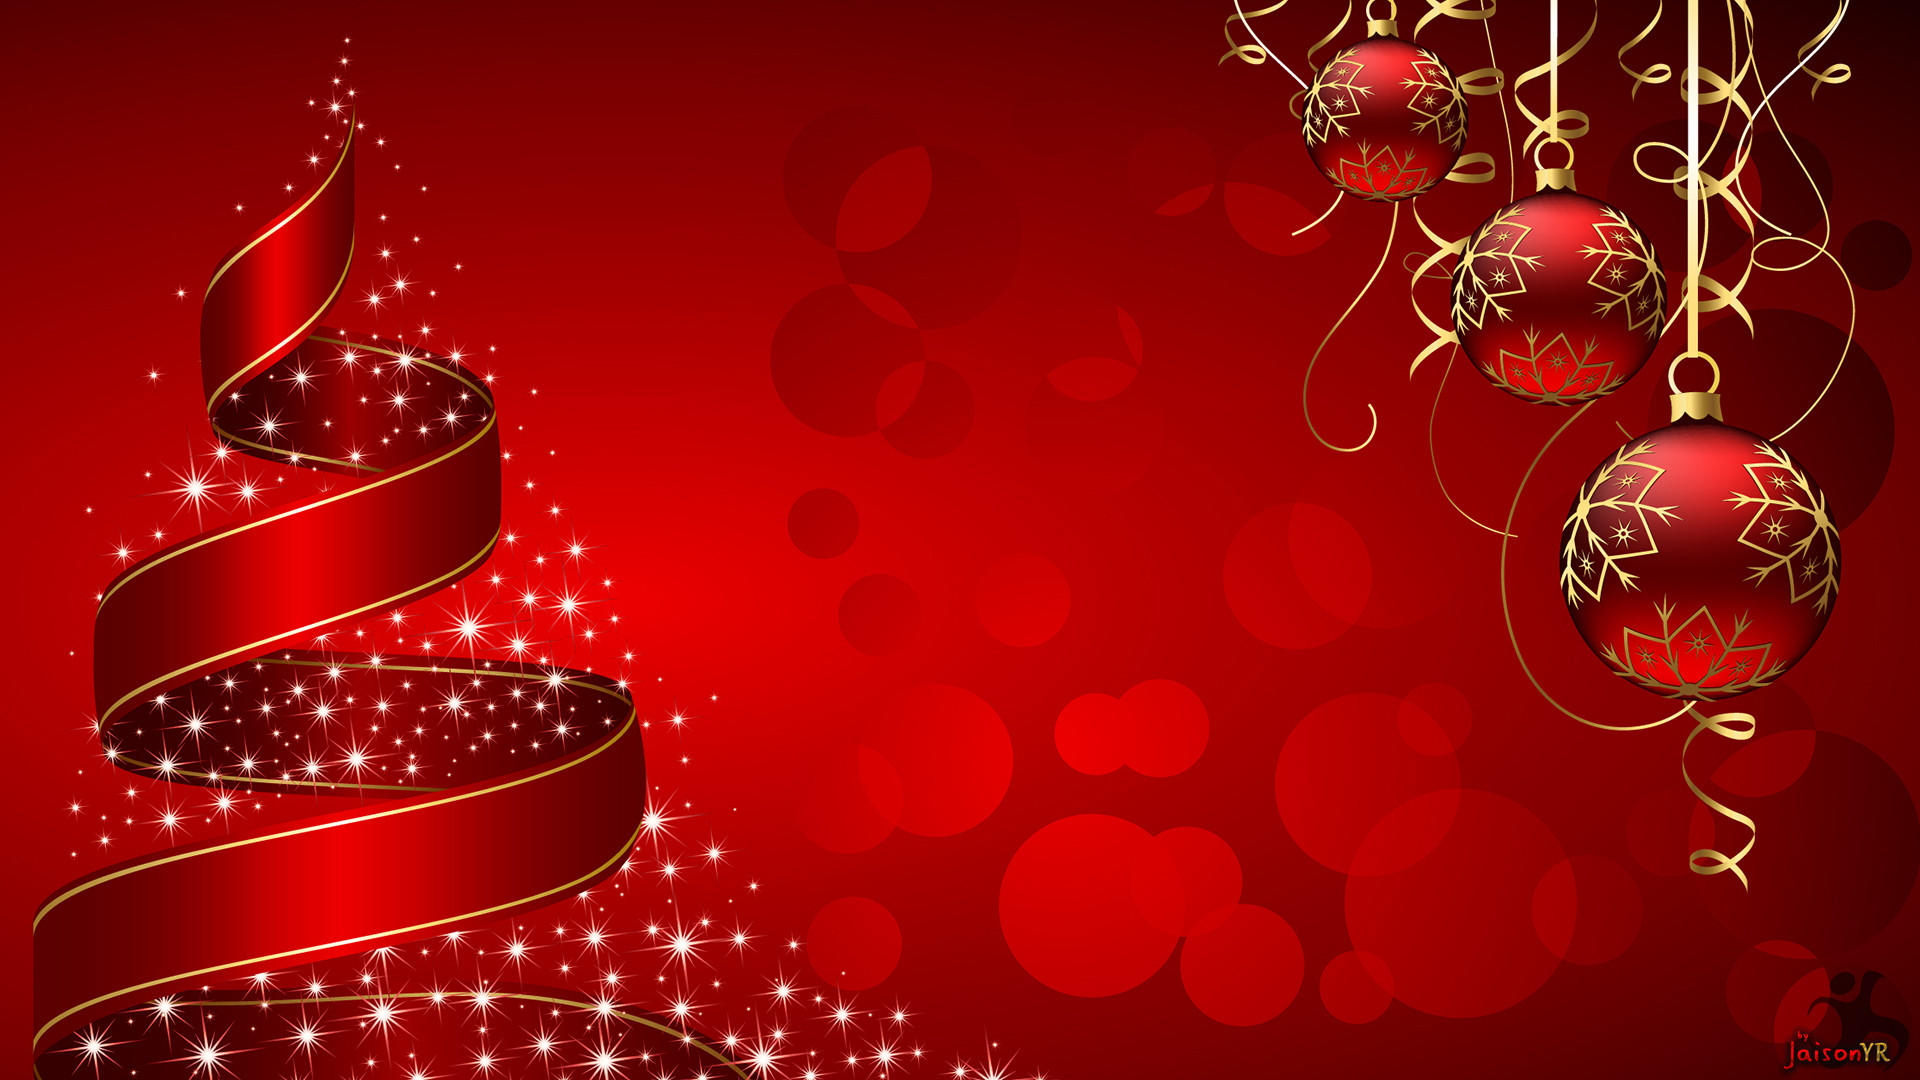 1920x1080 Christmas Background For Pictures